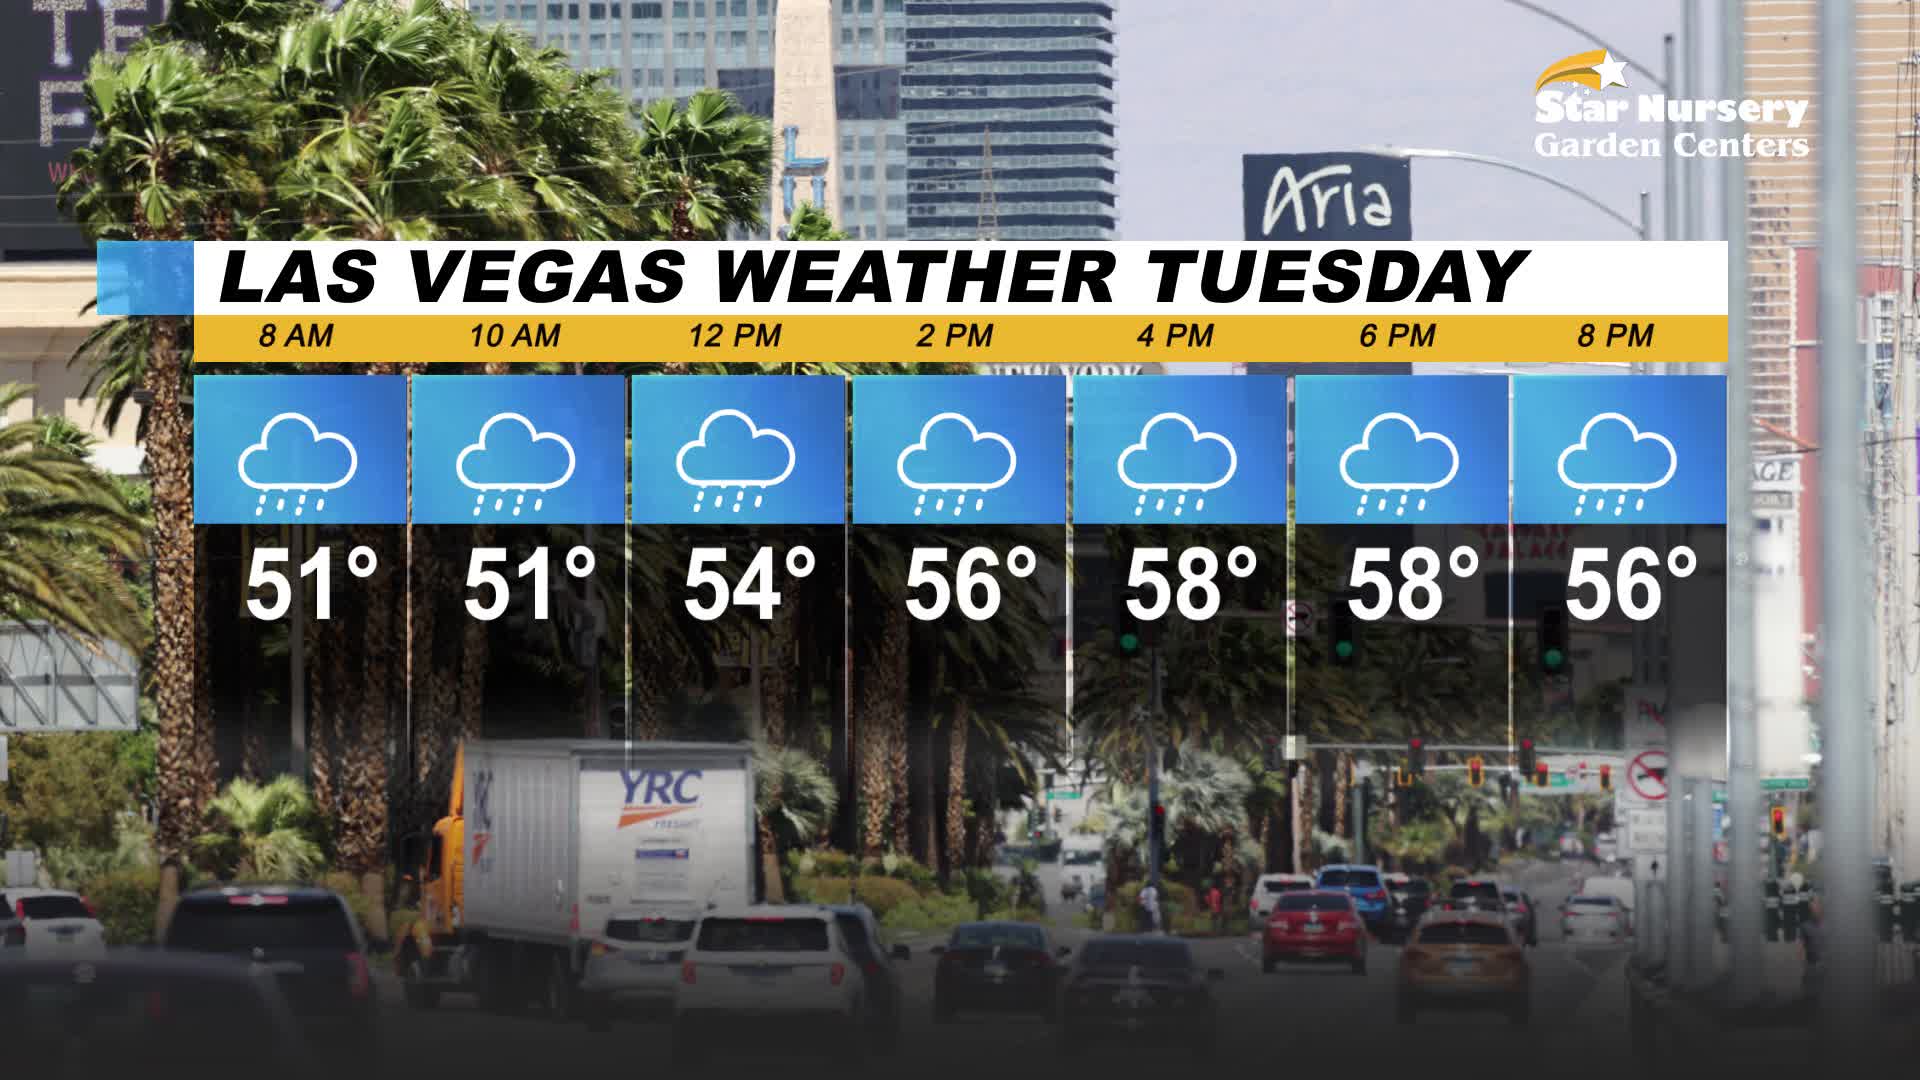 Rain expected throughout Tuesday